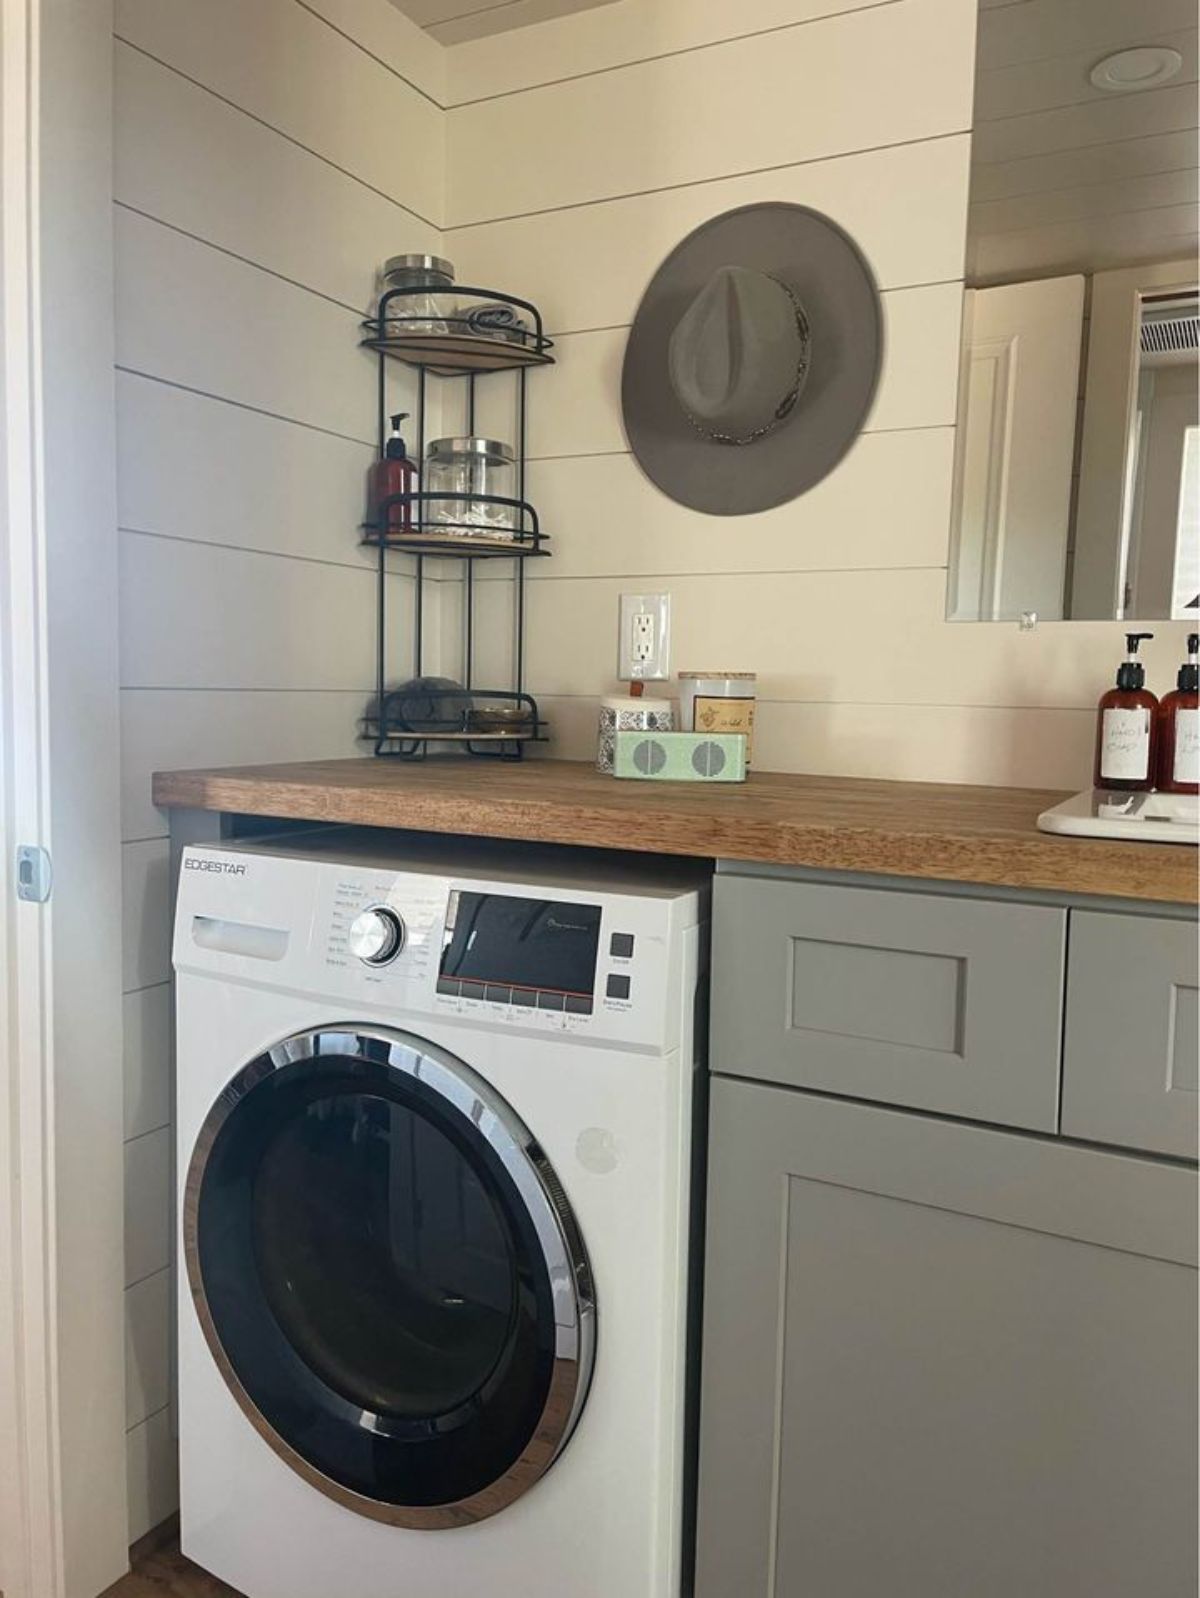 This new washer dryer combo is also included in the deal of 30’ Modern Tiny House on Wheels